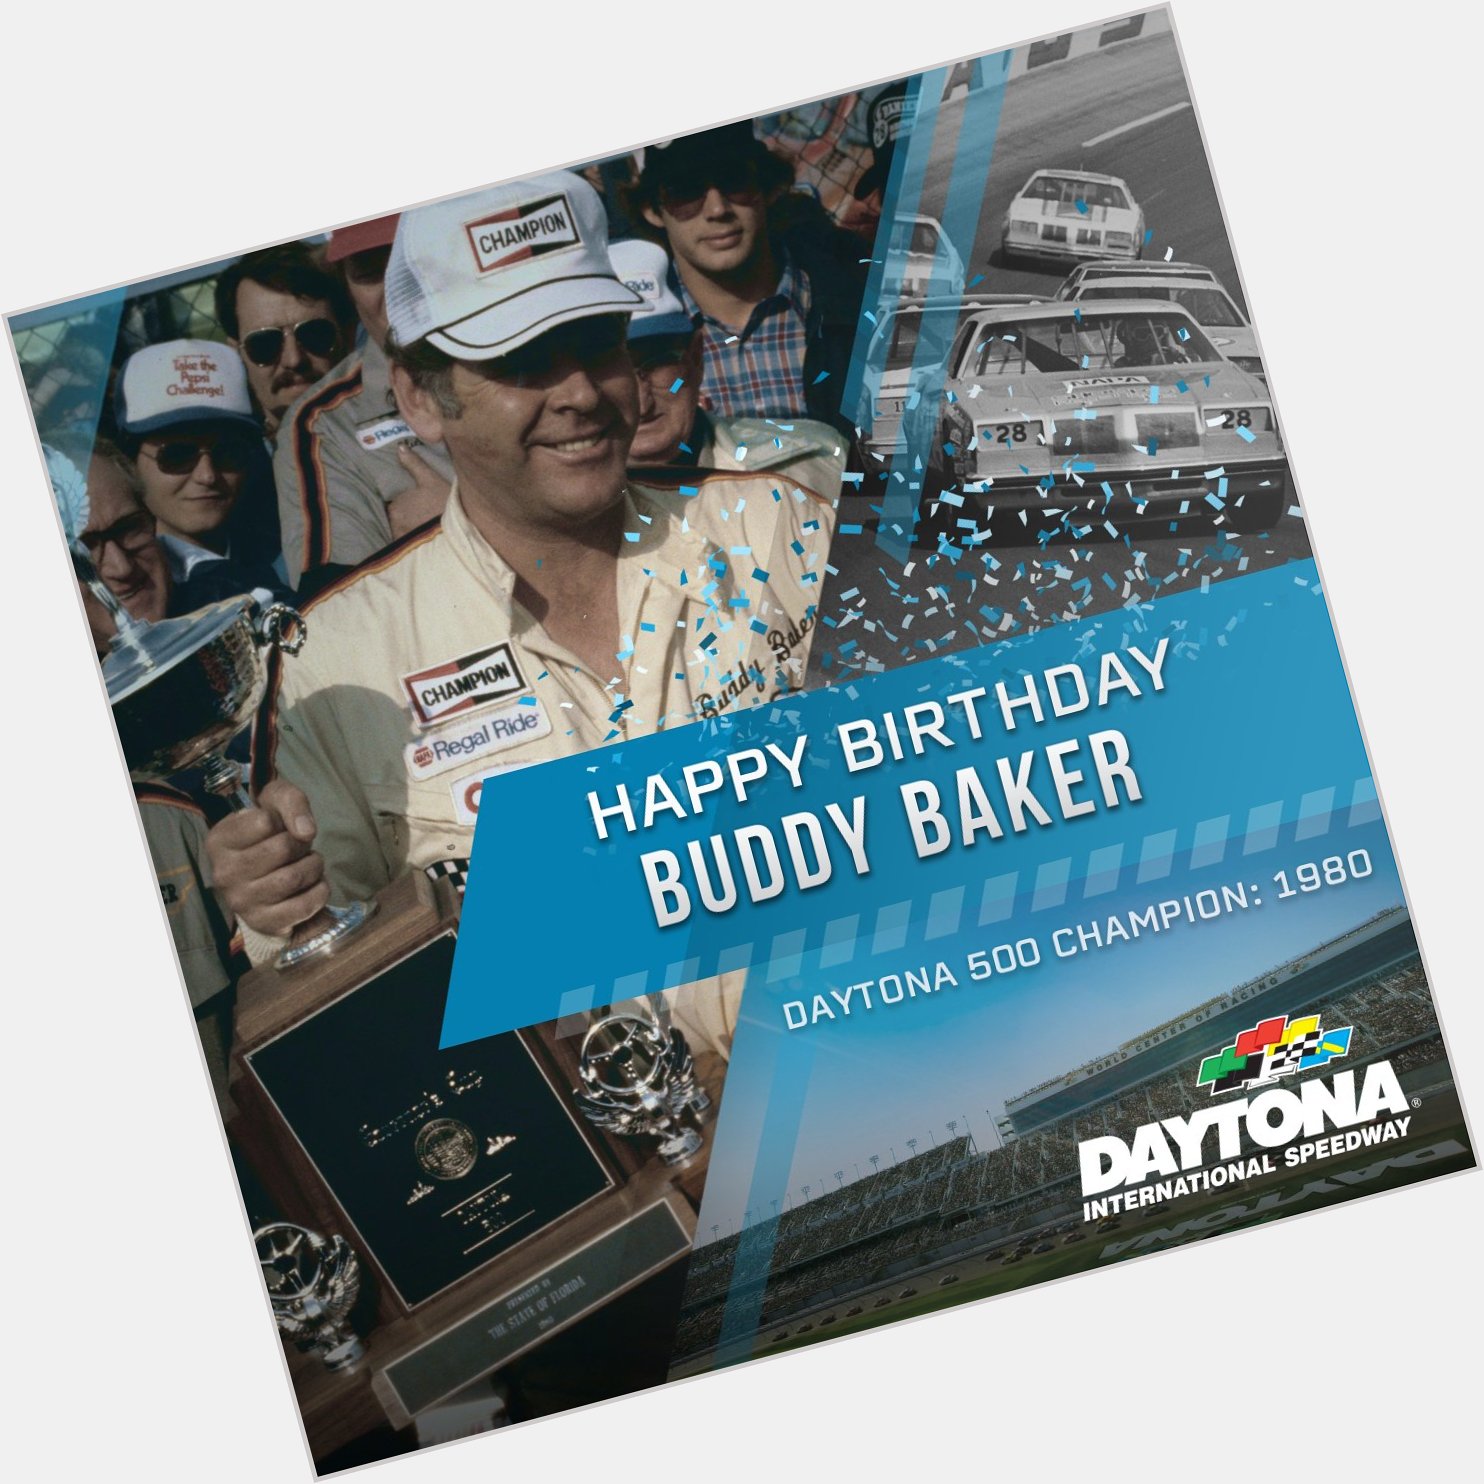 Happy Birthday to the 1980 Champion, the late Buddy Baker. 